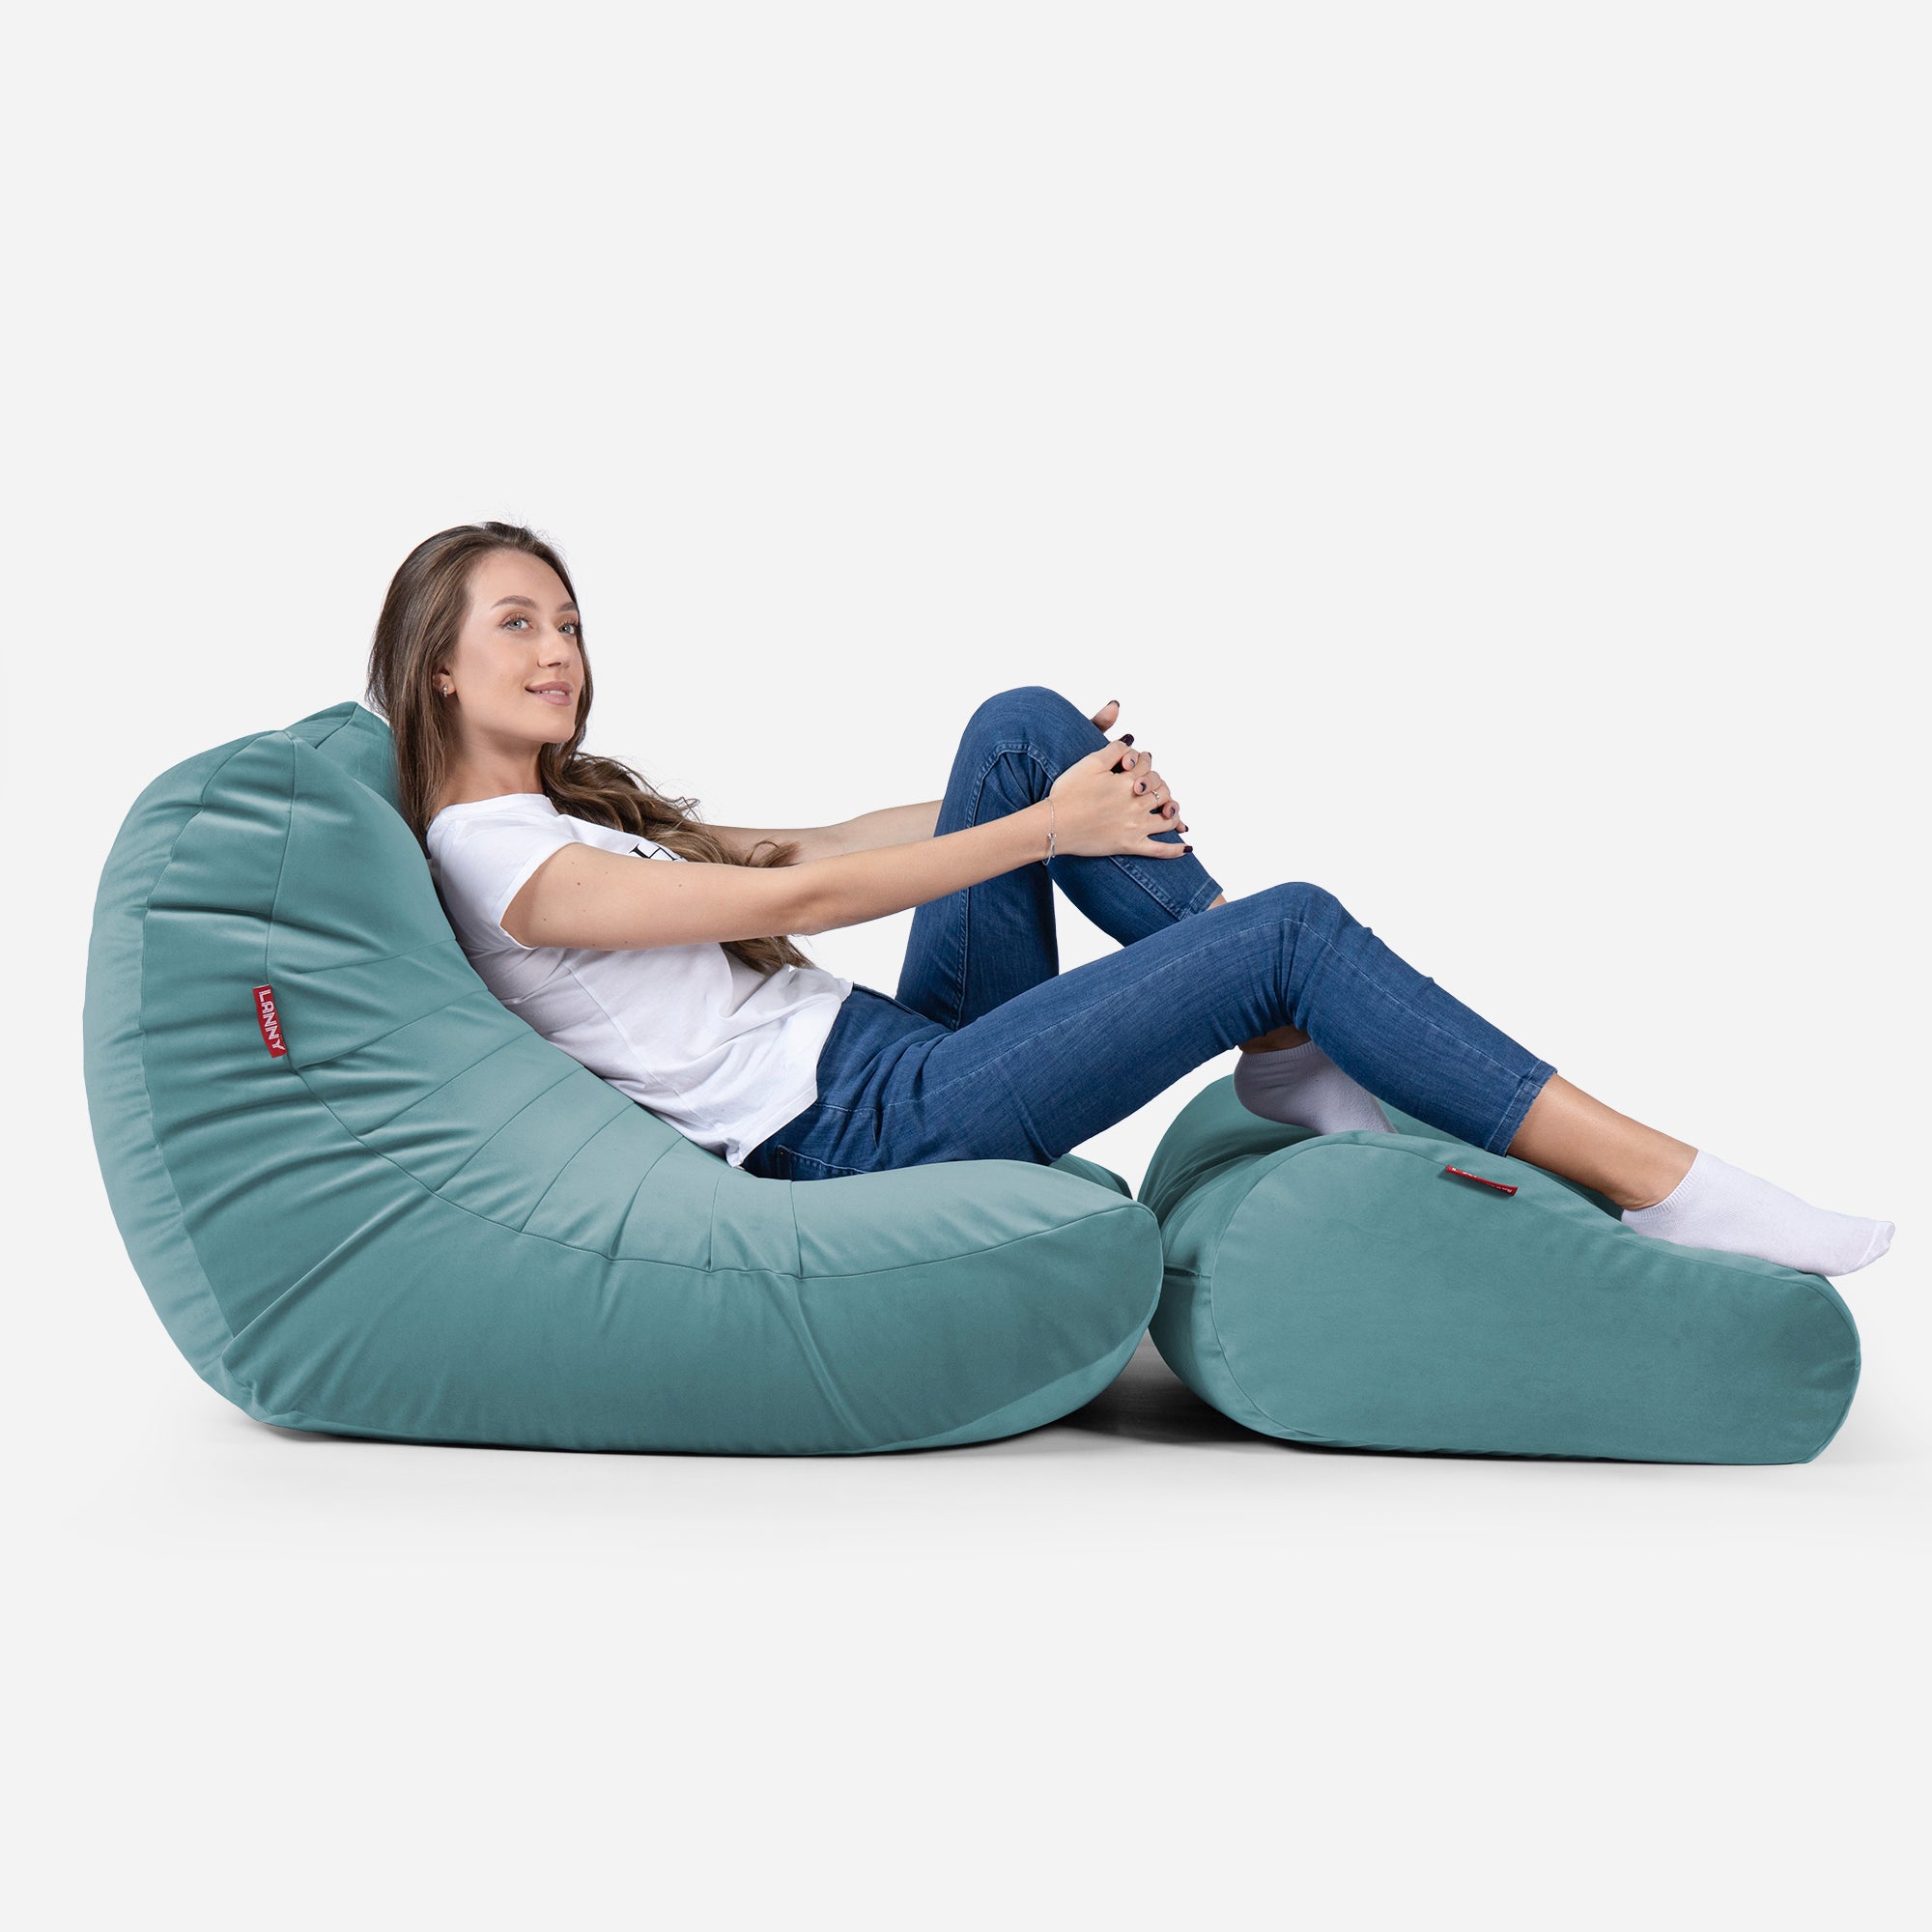 Beanbag Curvy Design Turquoise color with girl seating on it